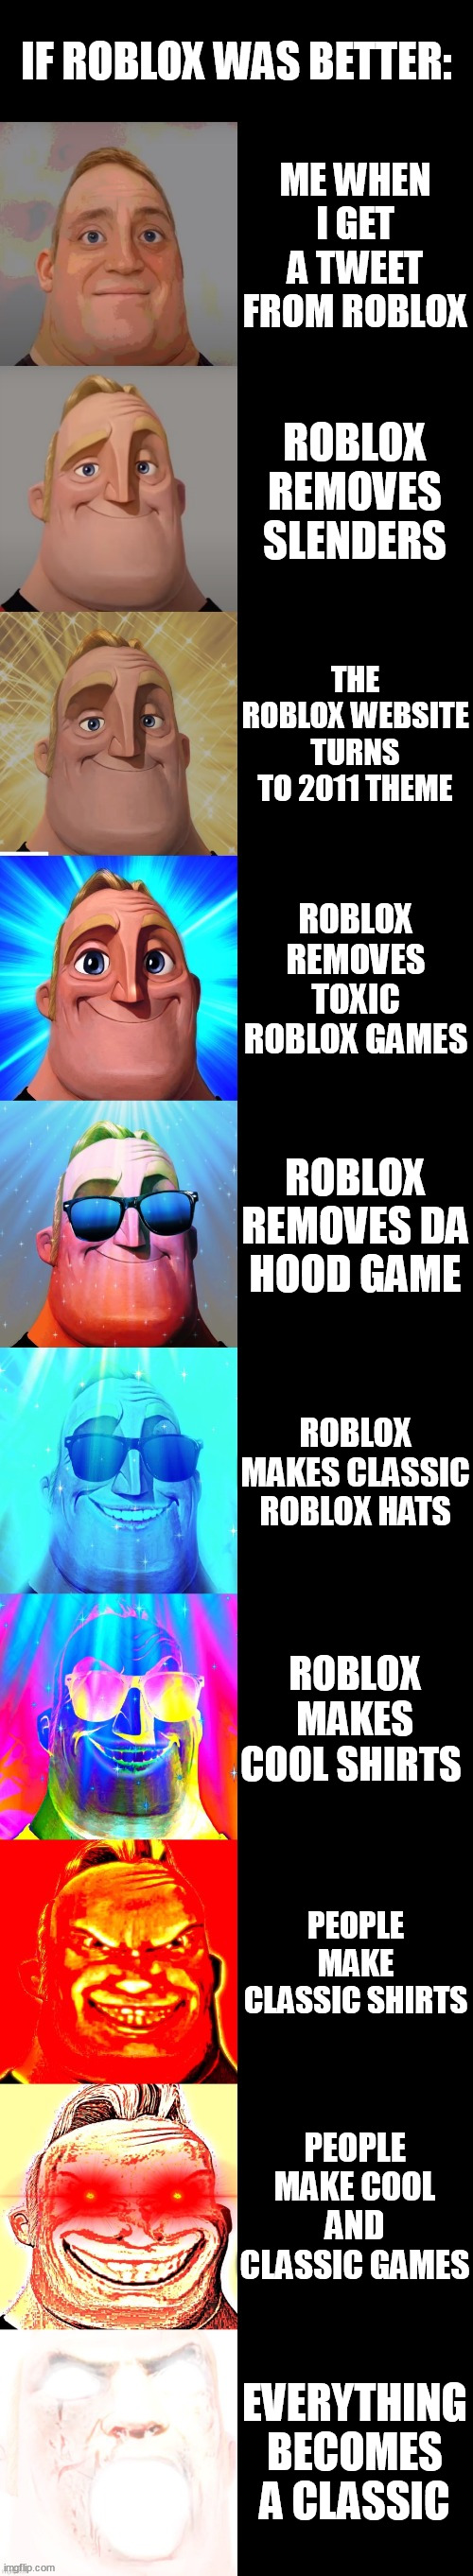 Do you prefer OLD ROBLOX or NEW ROBLOX and Why?! 🤔🫶